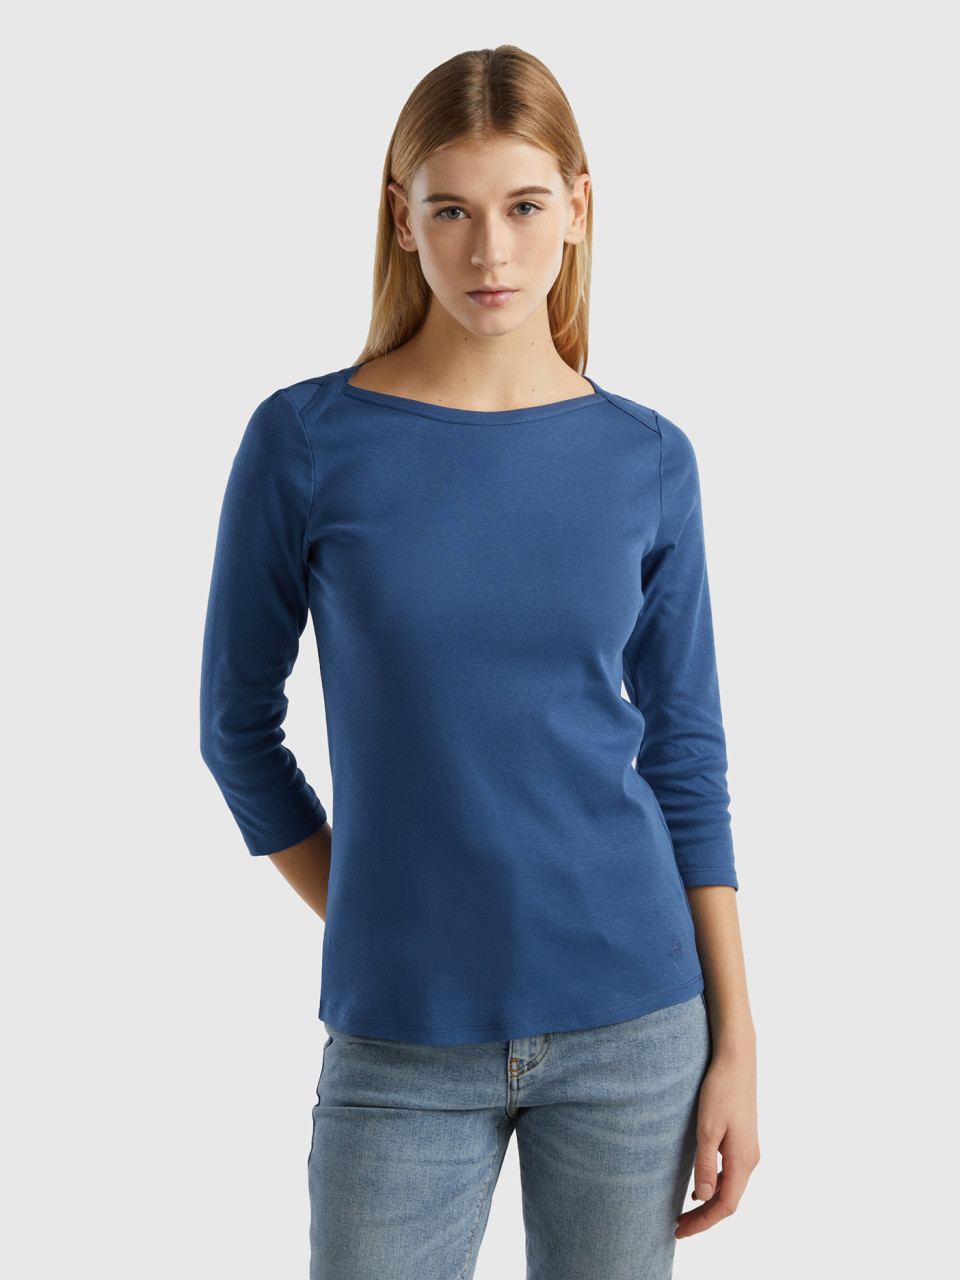 Benetton, T-shirt With Boat Neck In 100% Cotton, Air Force Blue, Women